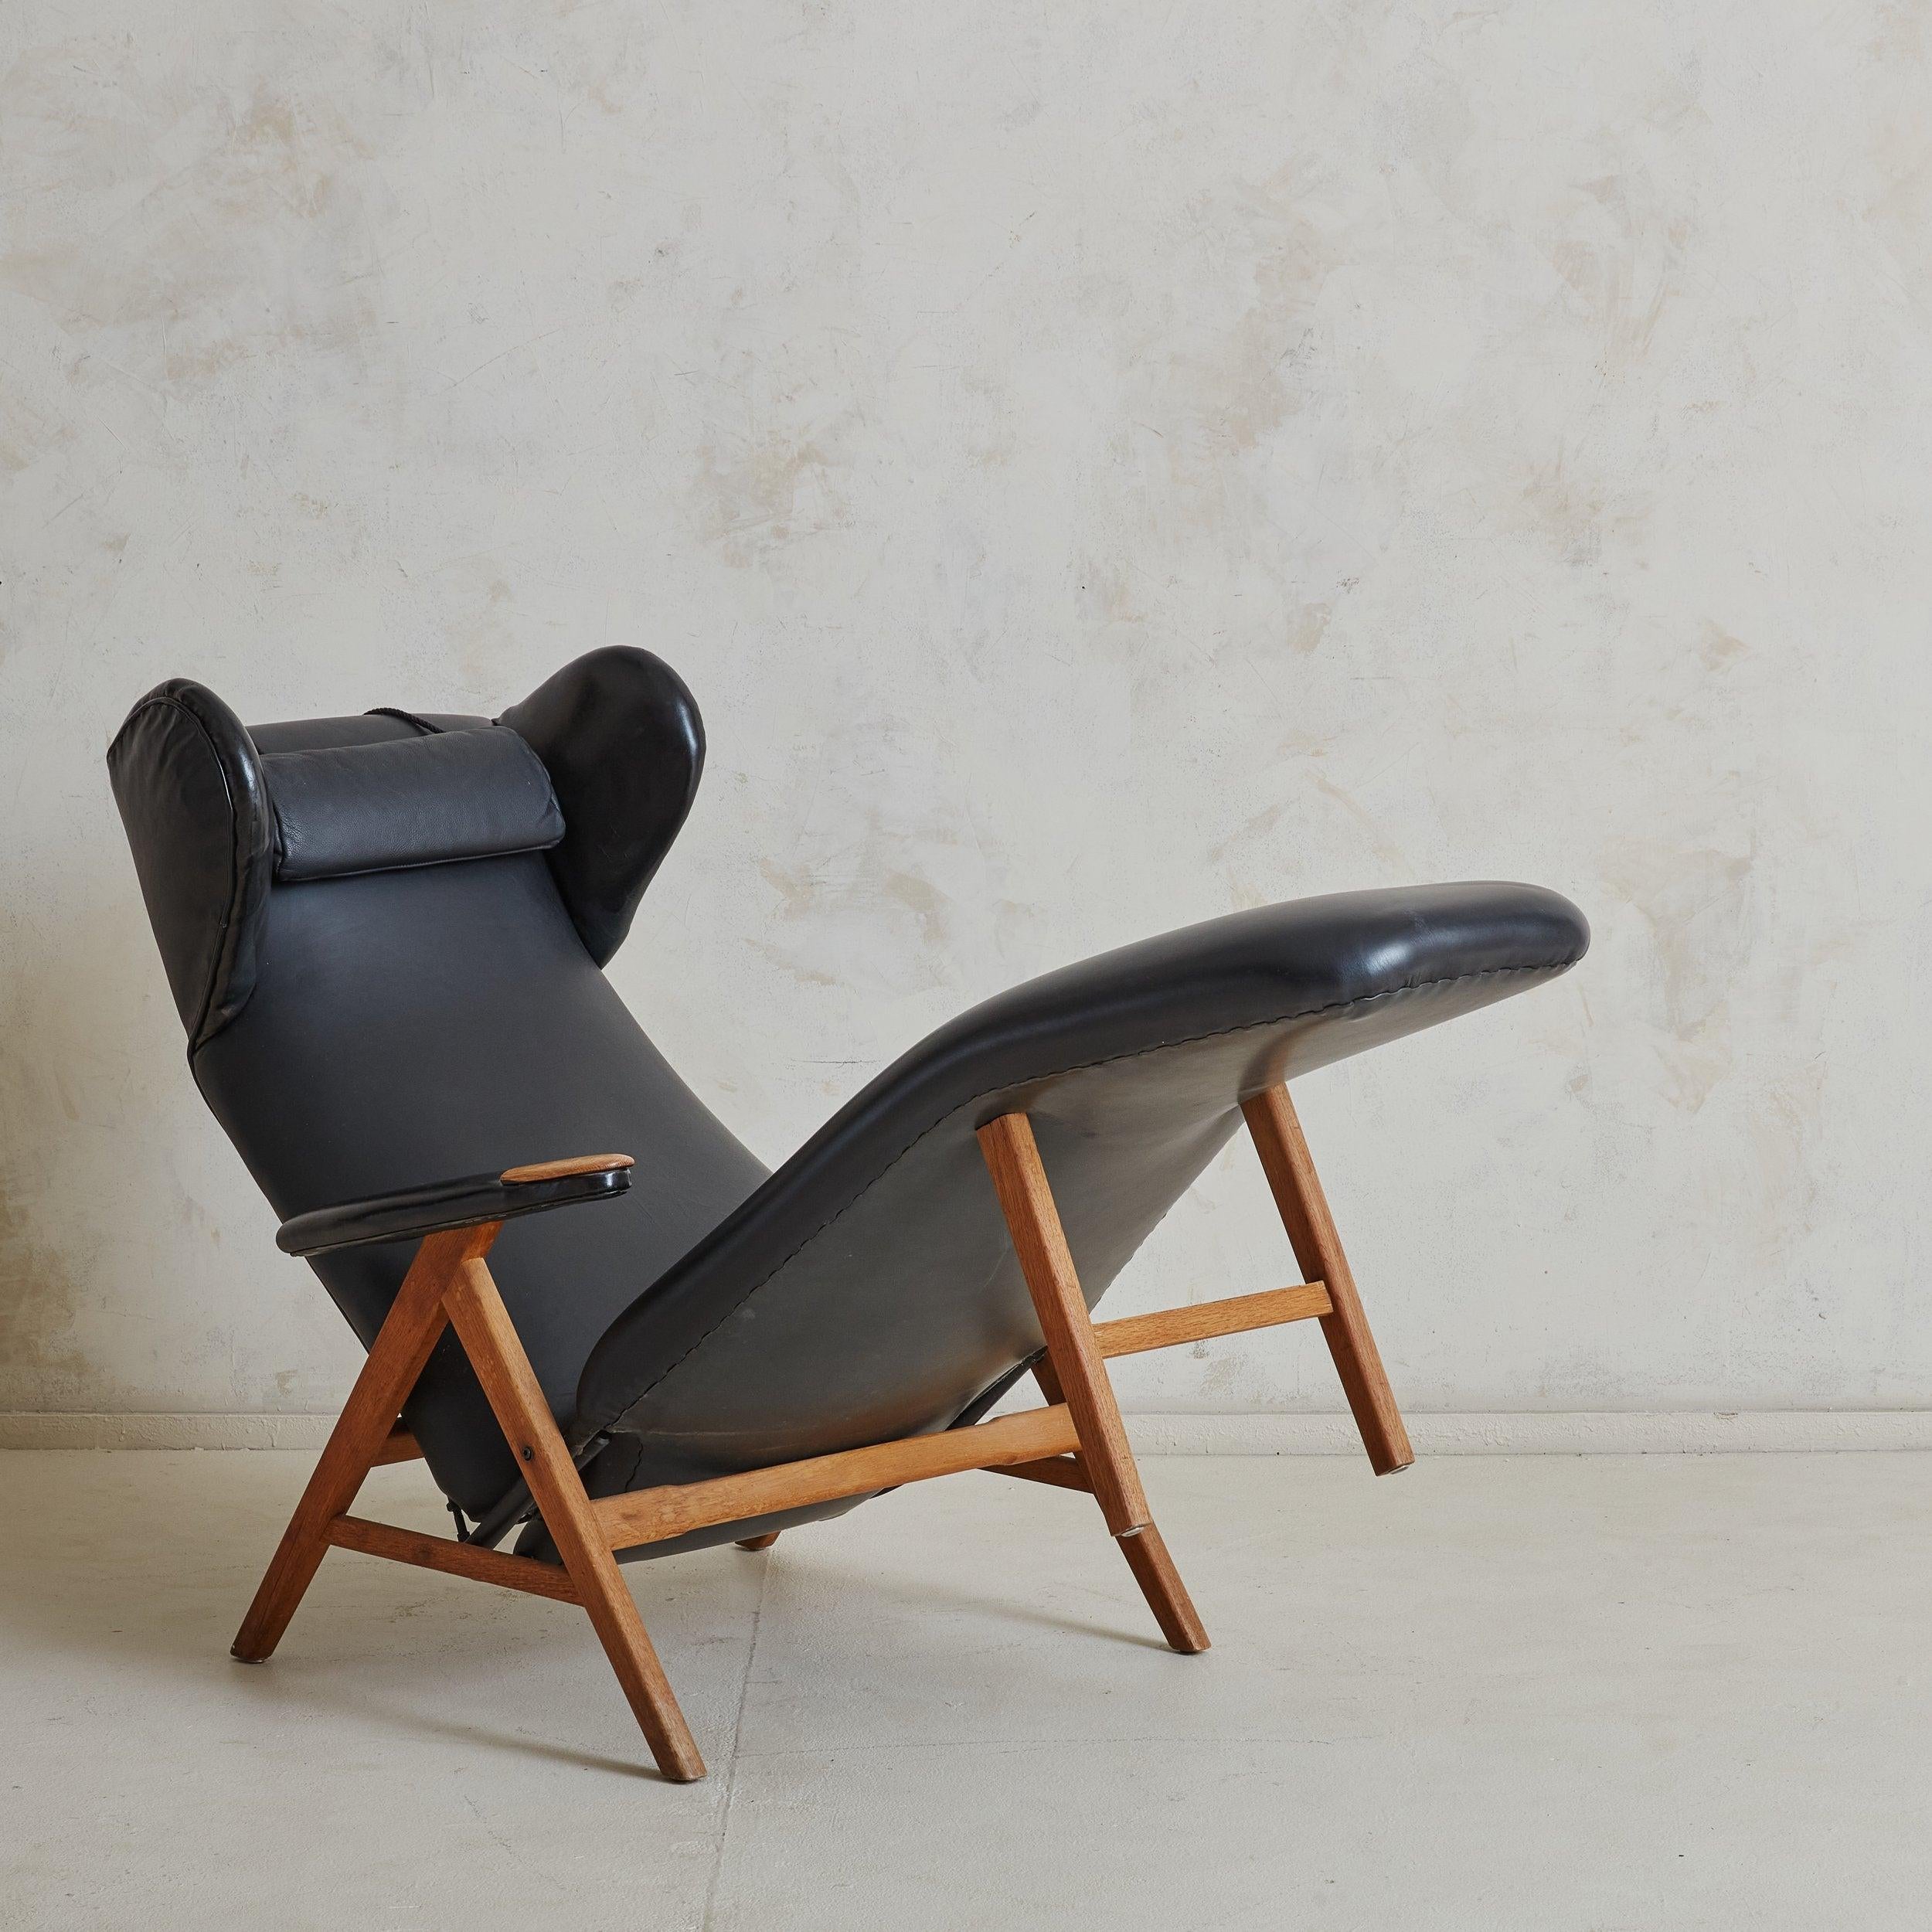 Danish Modern lounge chair features a “V” shaped honey oak frame, original black leather upholstery, padded vinyl armrests, and a removable neck pillow for added comfort. Exaggerated ‘ears’ resemble the aesthetic of a traditional wingback chair. The